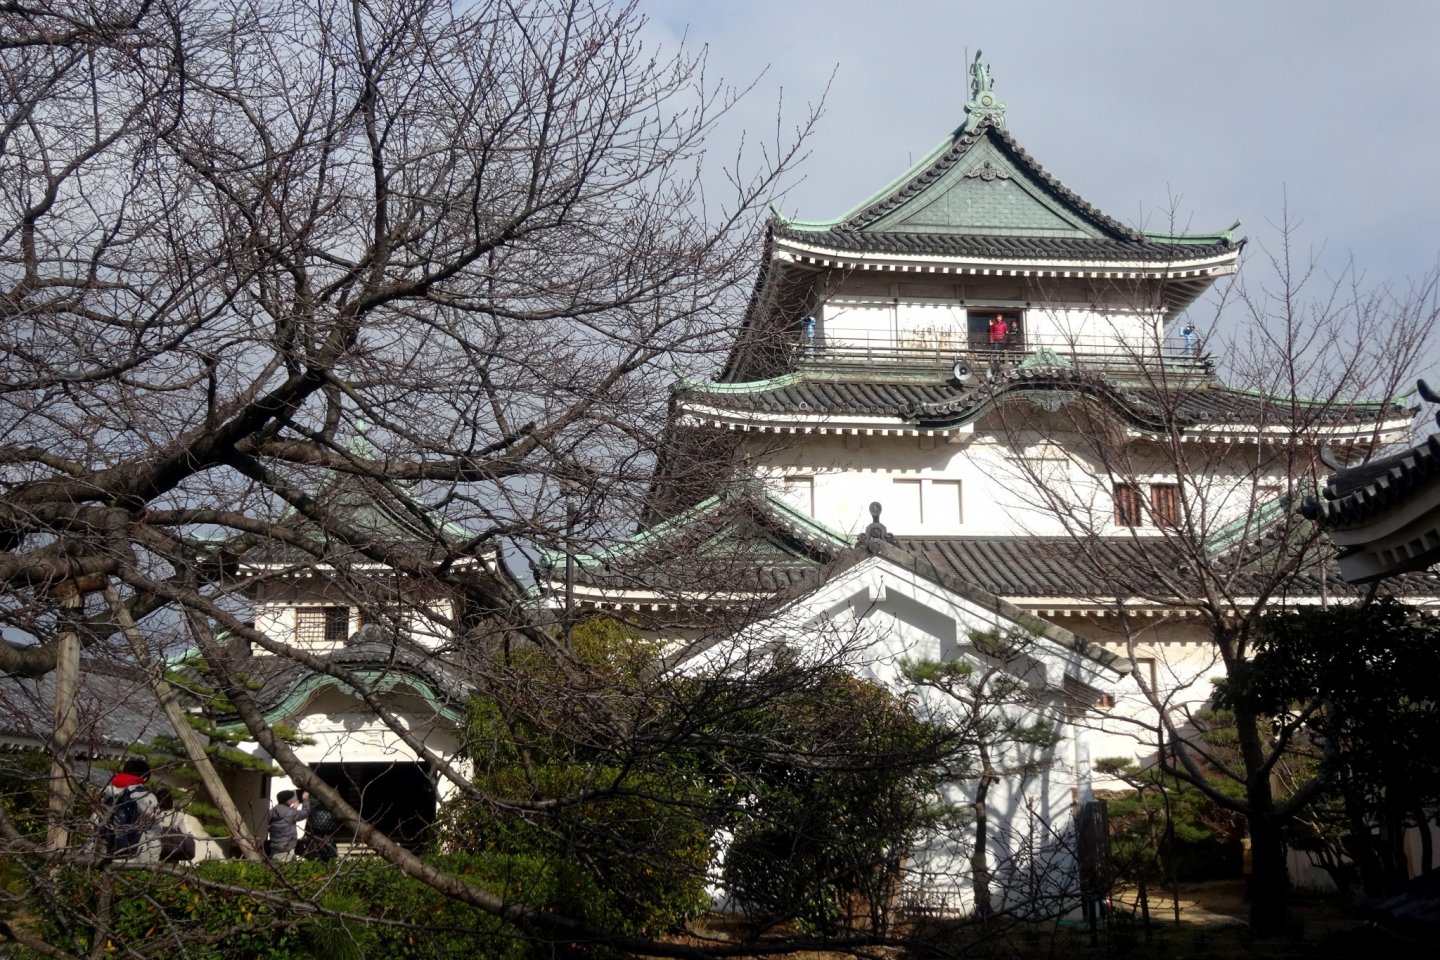 The main keep of Wakayama Castle, as seen from the inner courtyard